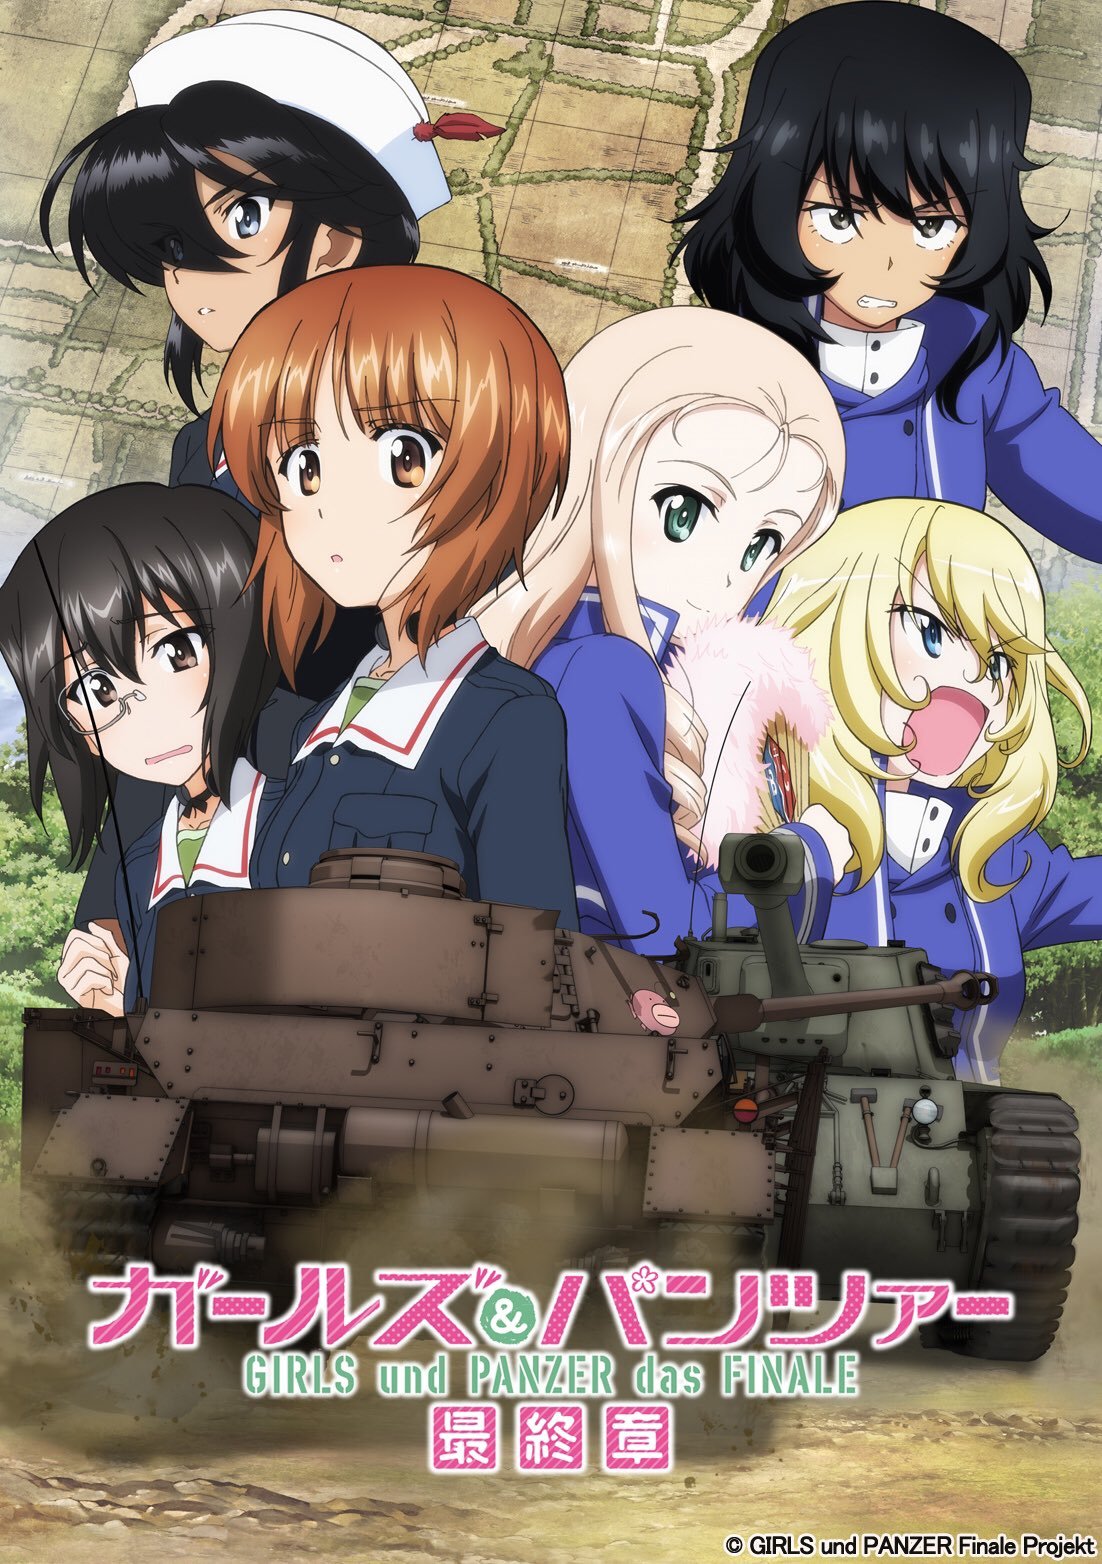 A new PV and key visual for Part 2 of the six-part âGirls und Panzer das Finaleâ anime film series; opens June 15th.